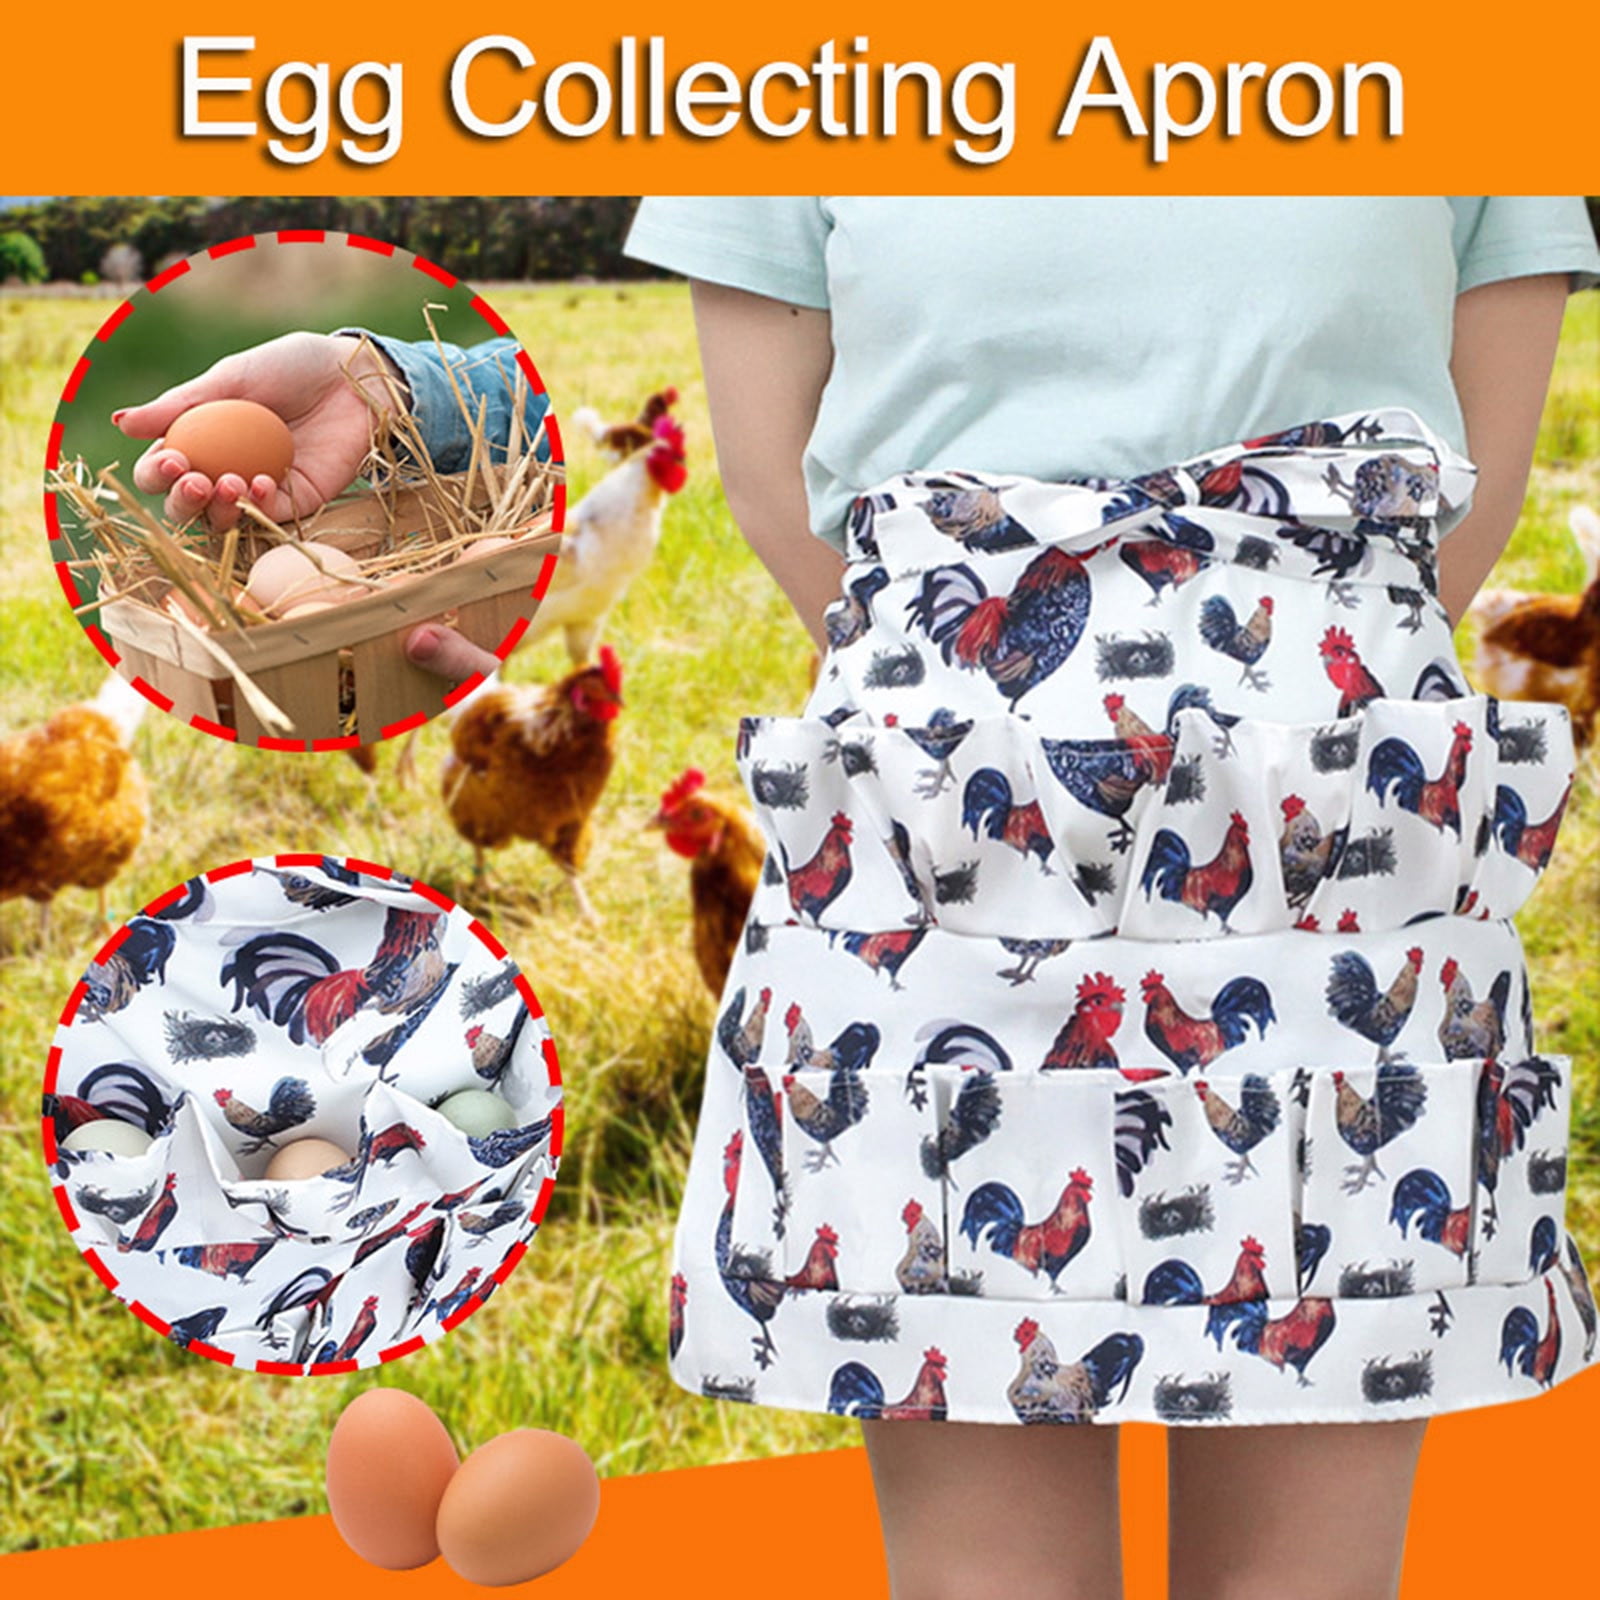 AURIGATE Egg Apron with 12 Pockets, Egg Collecting Apron, Gathering Holding  Apron for Chicken Hen Duck Goose Eggs,Chicken Egg Holder Apron for Kids